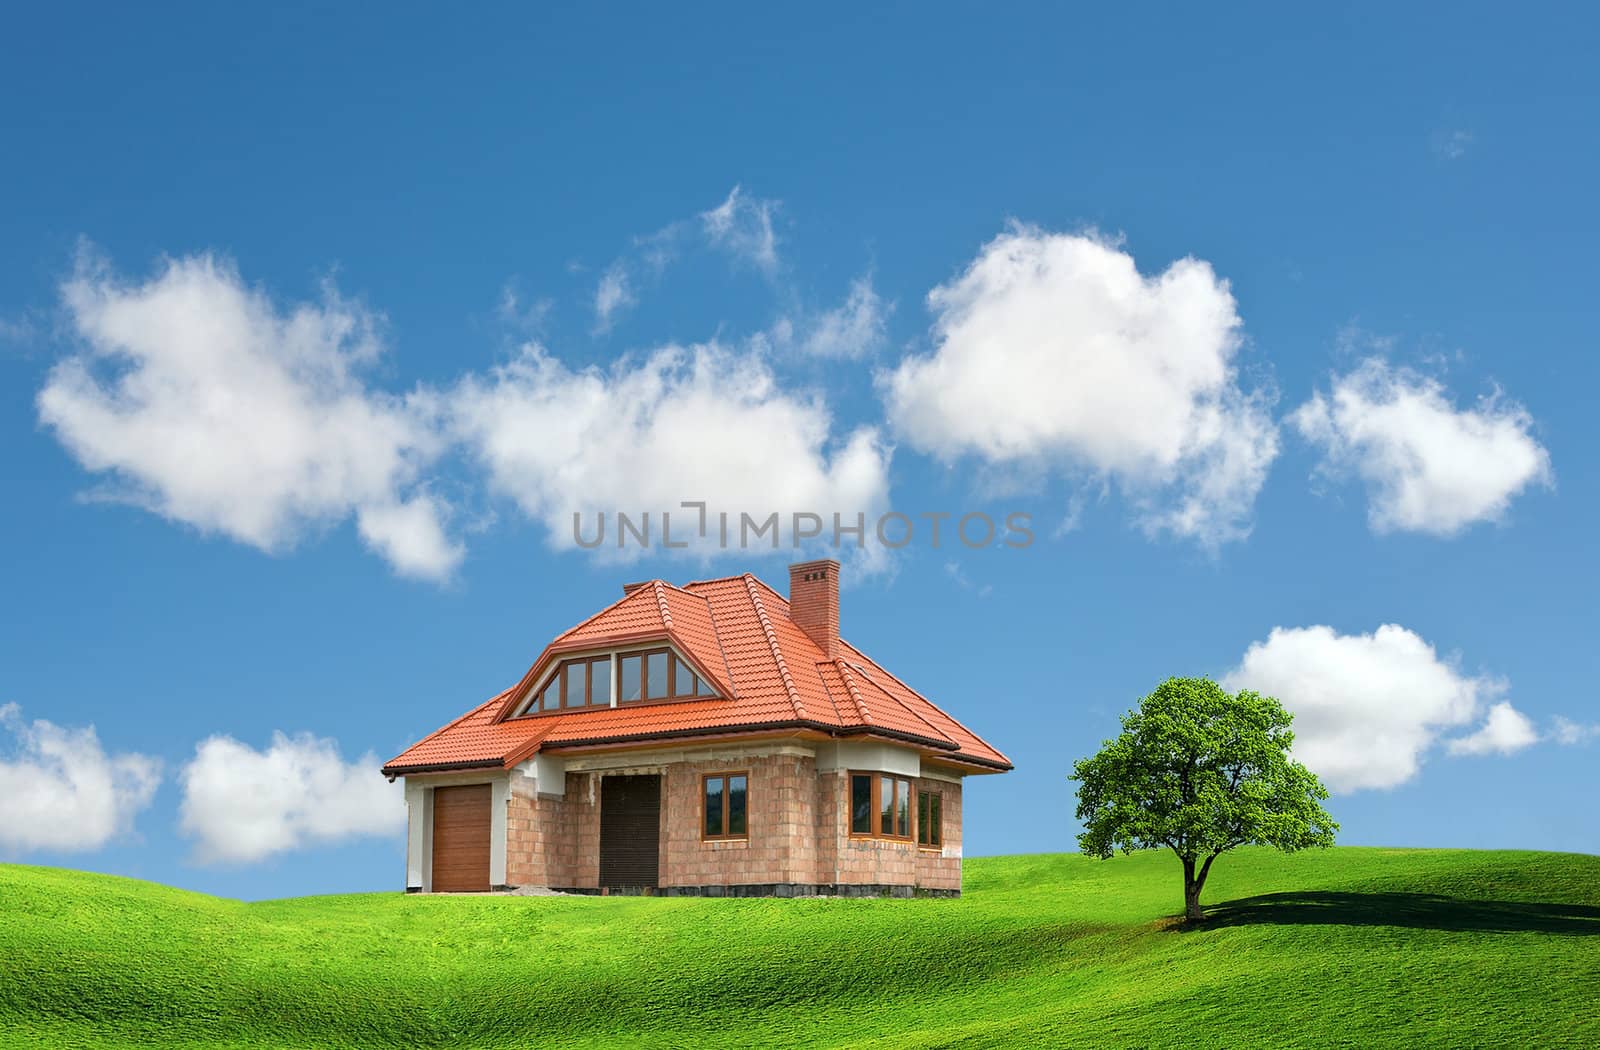 	
New house on a green hill